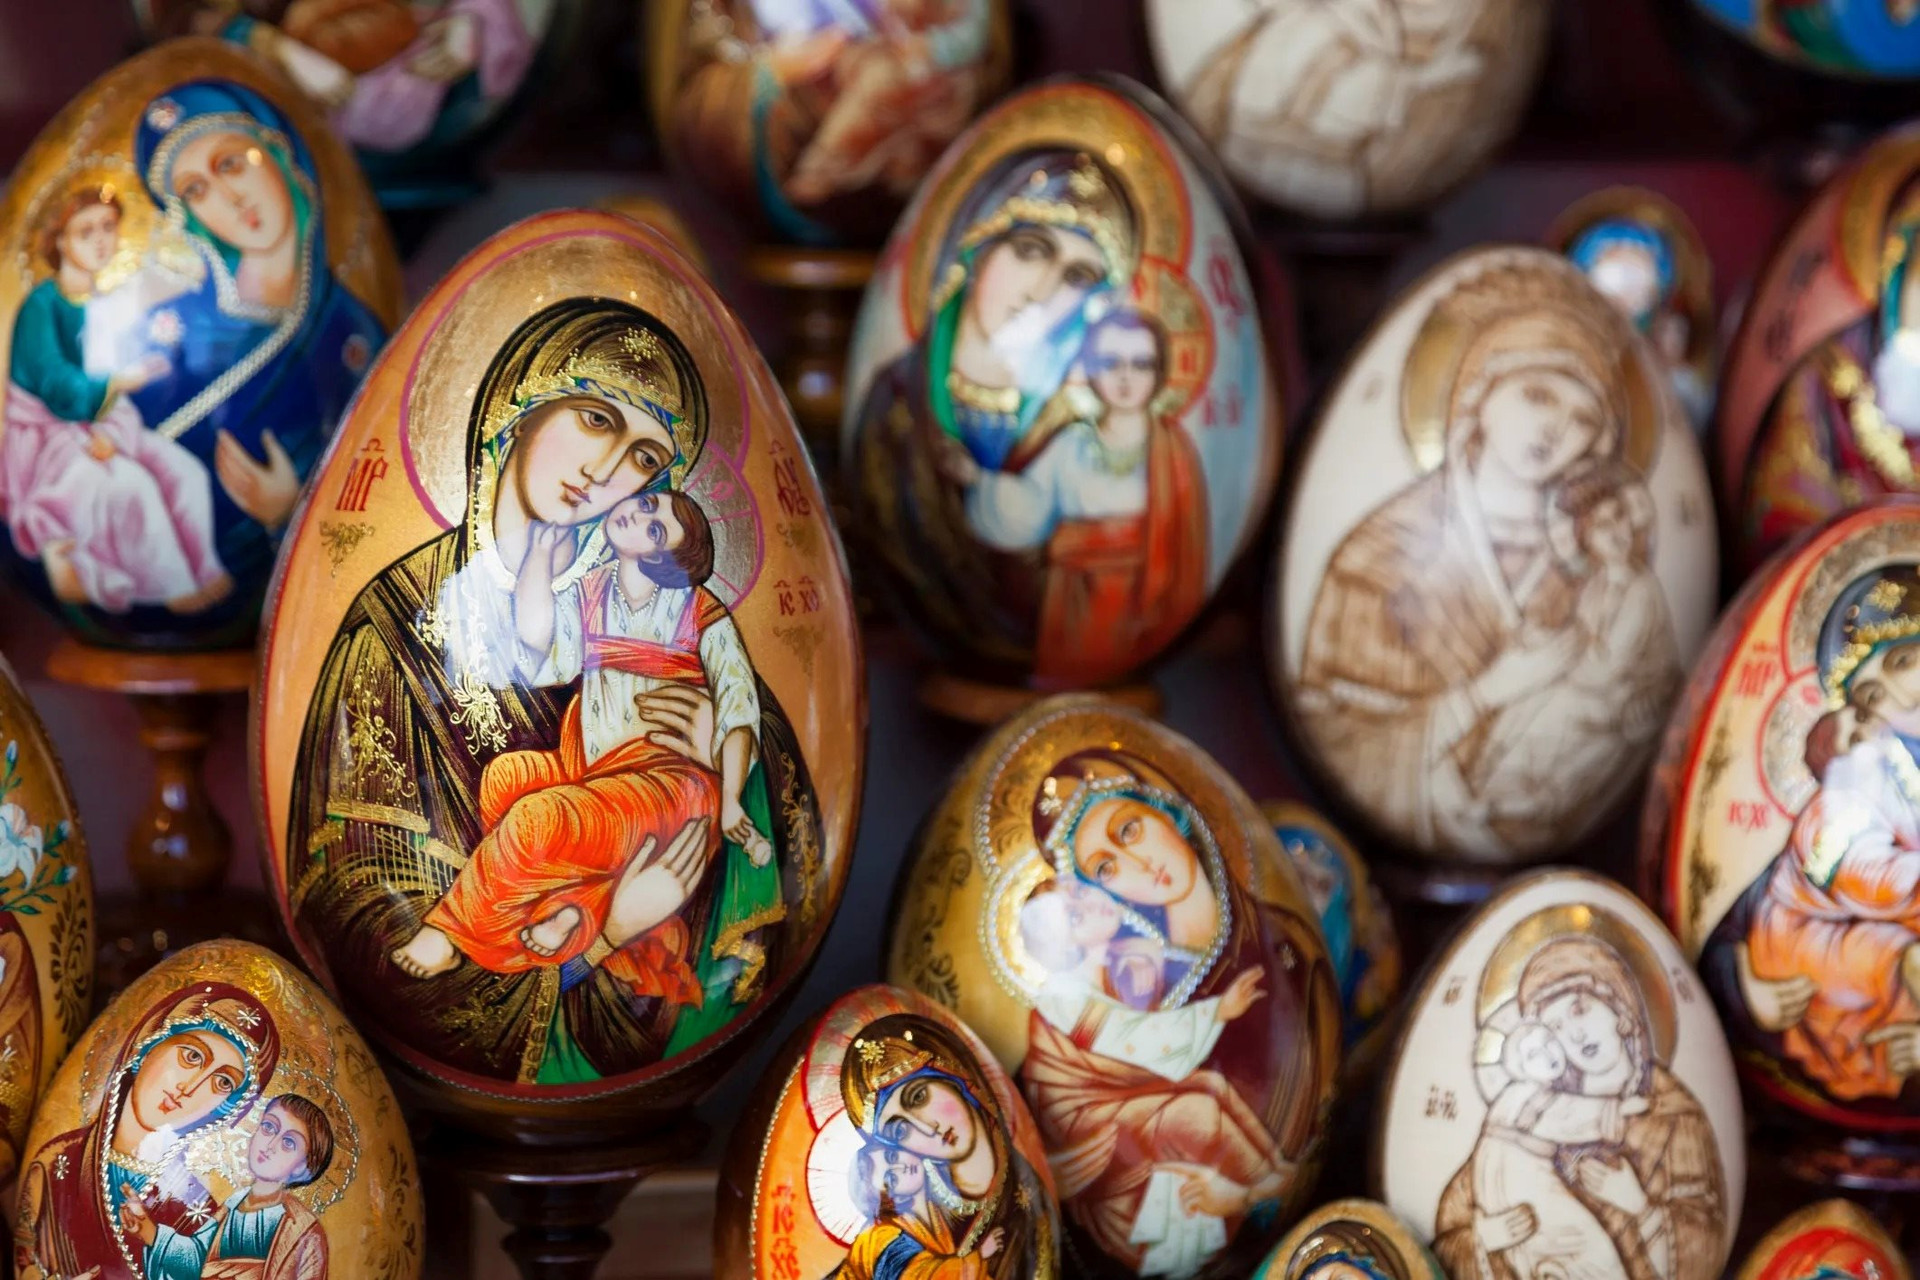 web3-egg-jesus-historical-red-faberge-church-christ-mary-saint-getty-images_11zon.jpg